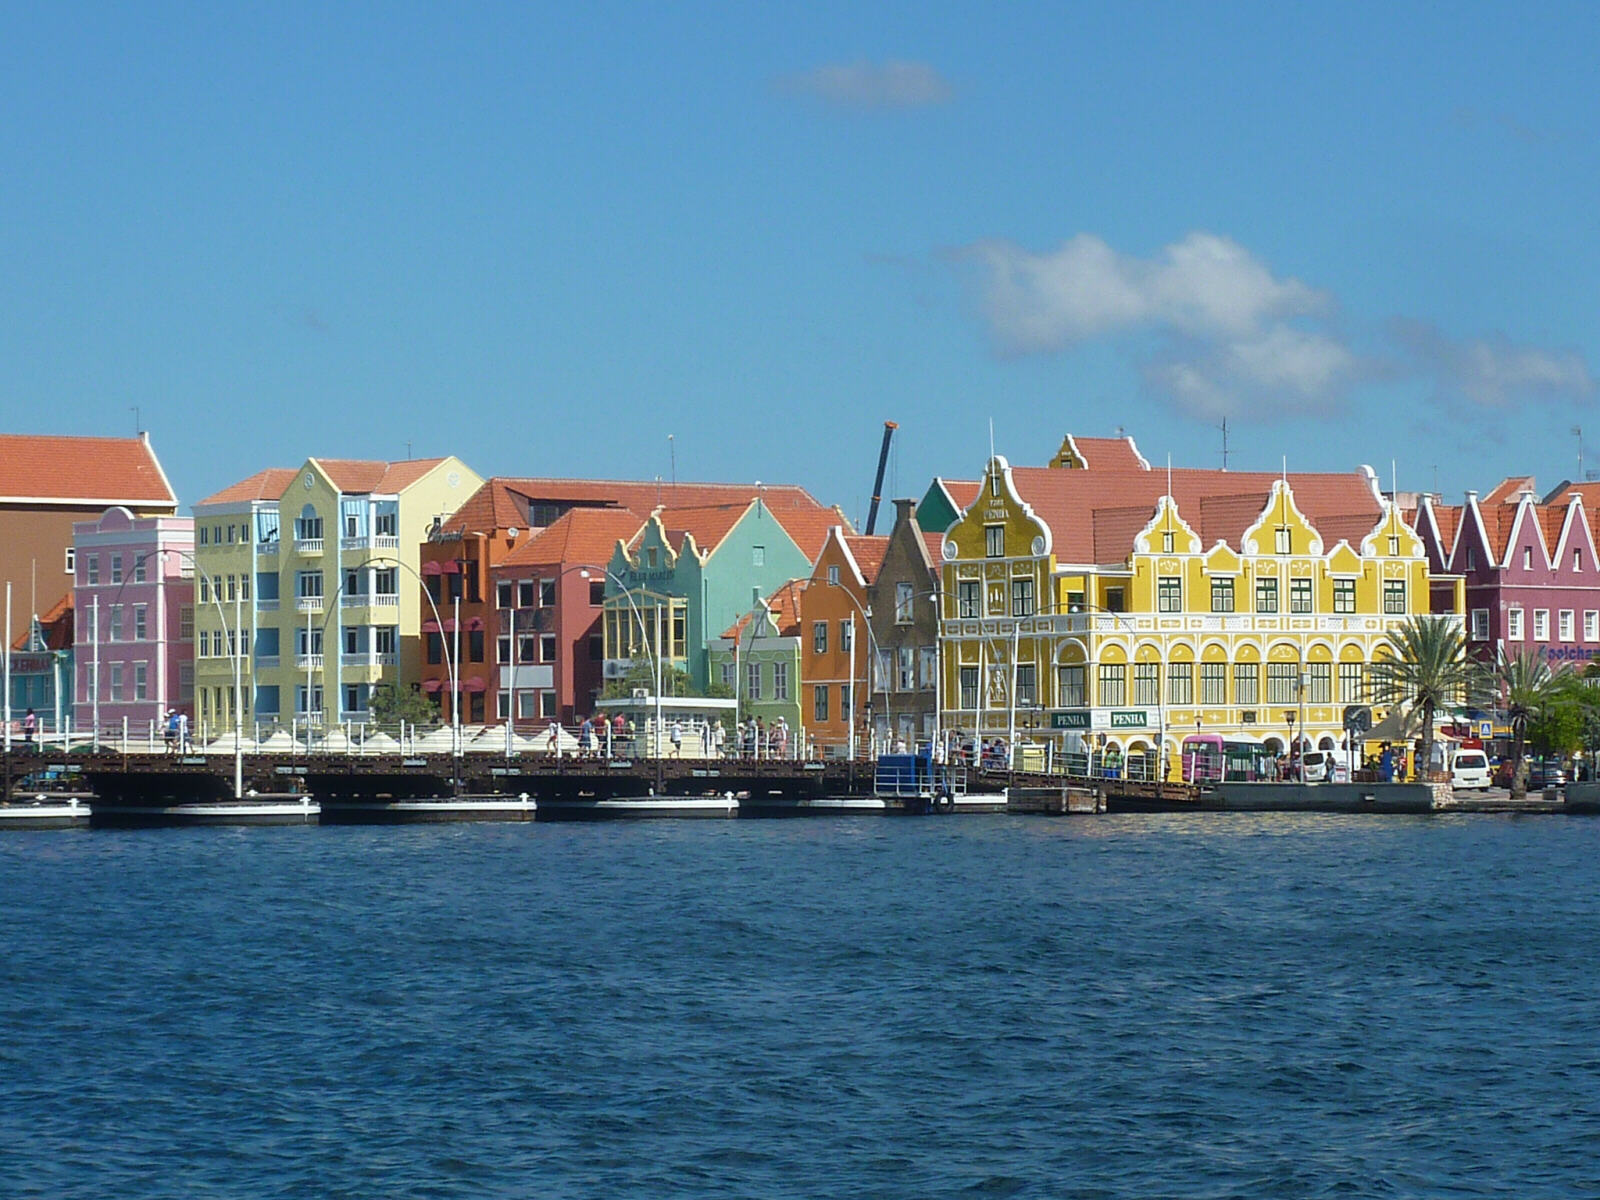 The historic old town of Willemstad in Curacao